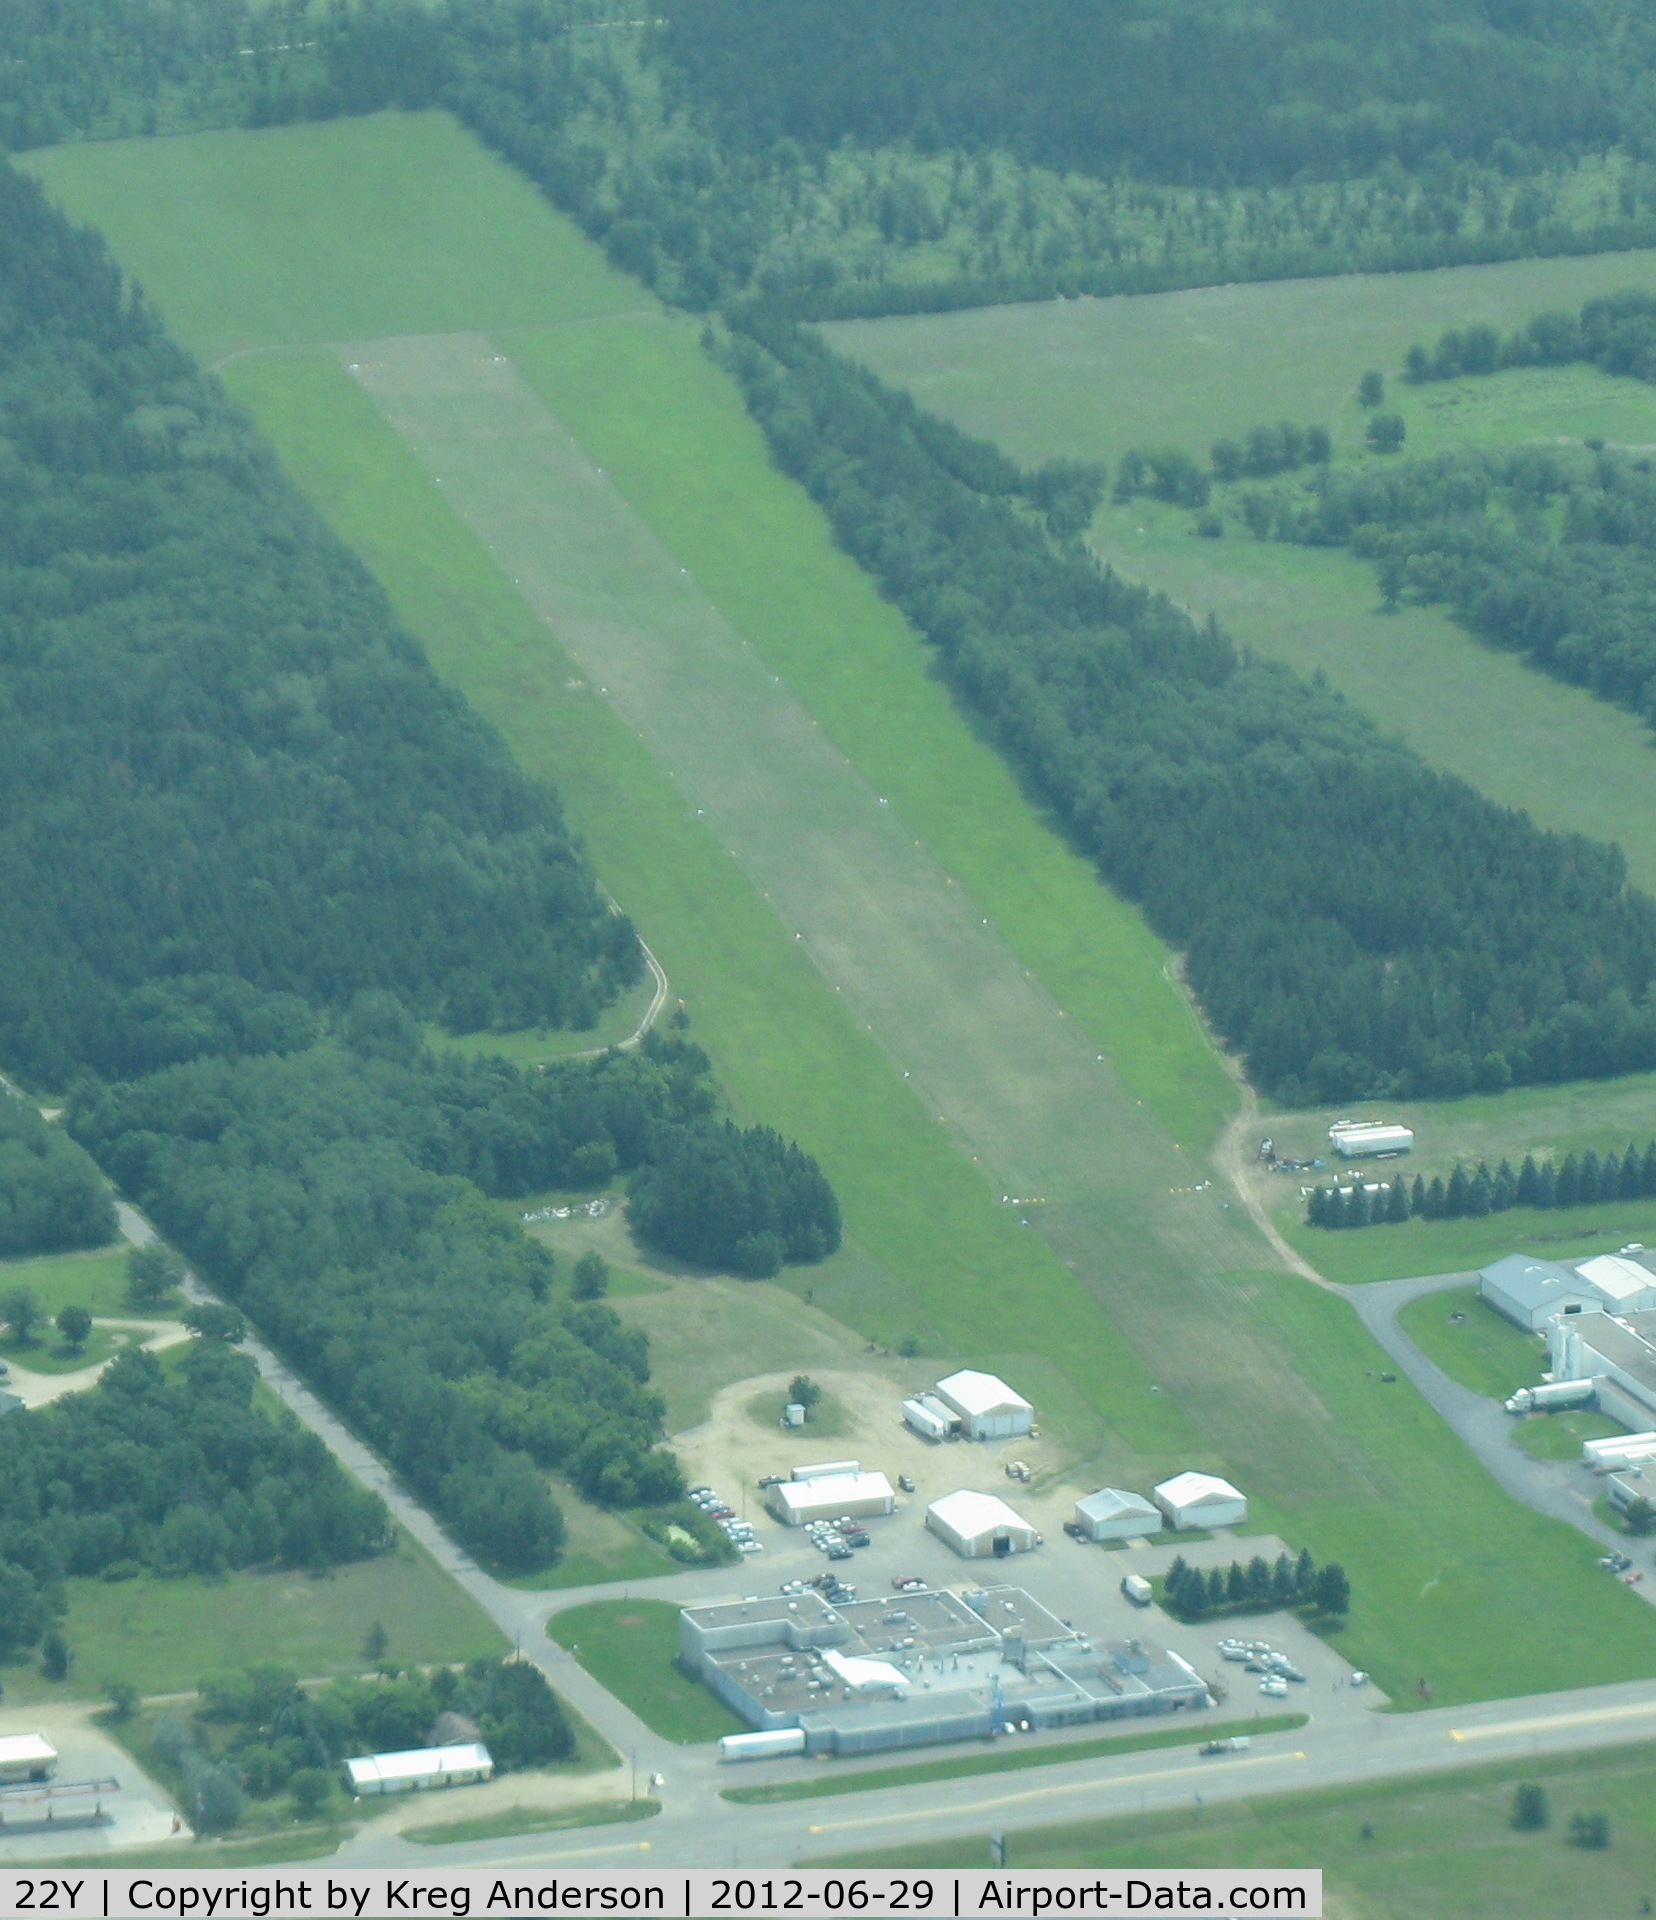 Morey's Airport (22Y) - A shot of Morey's Airport in Motley, MN from 3500'.